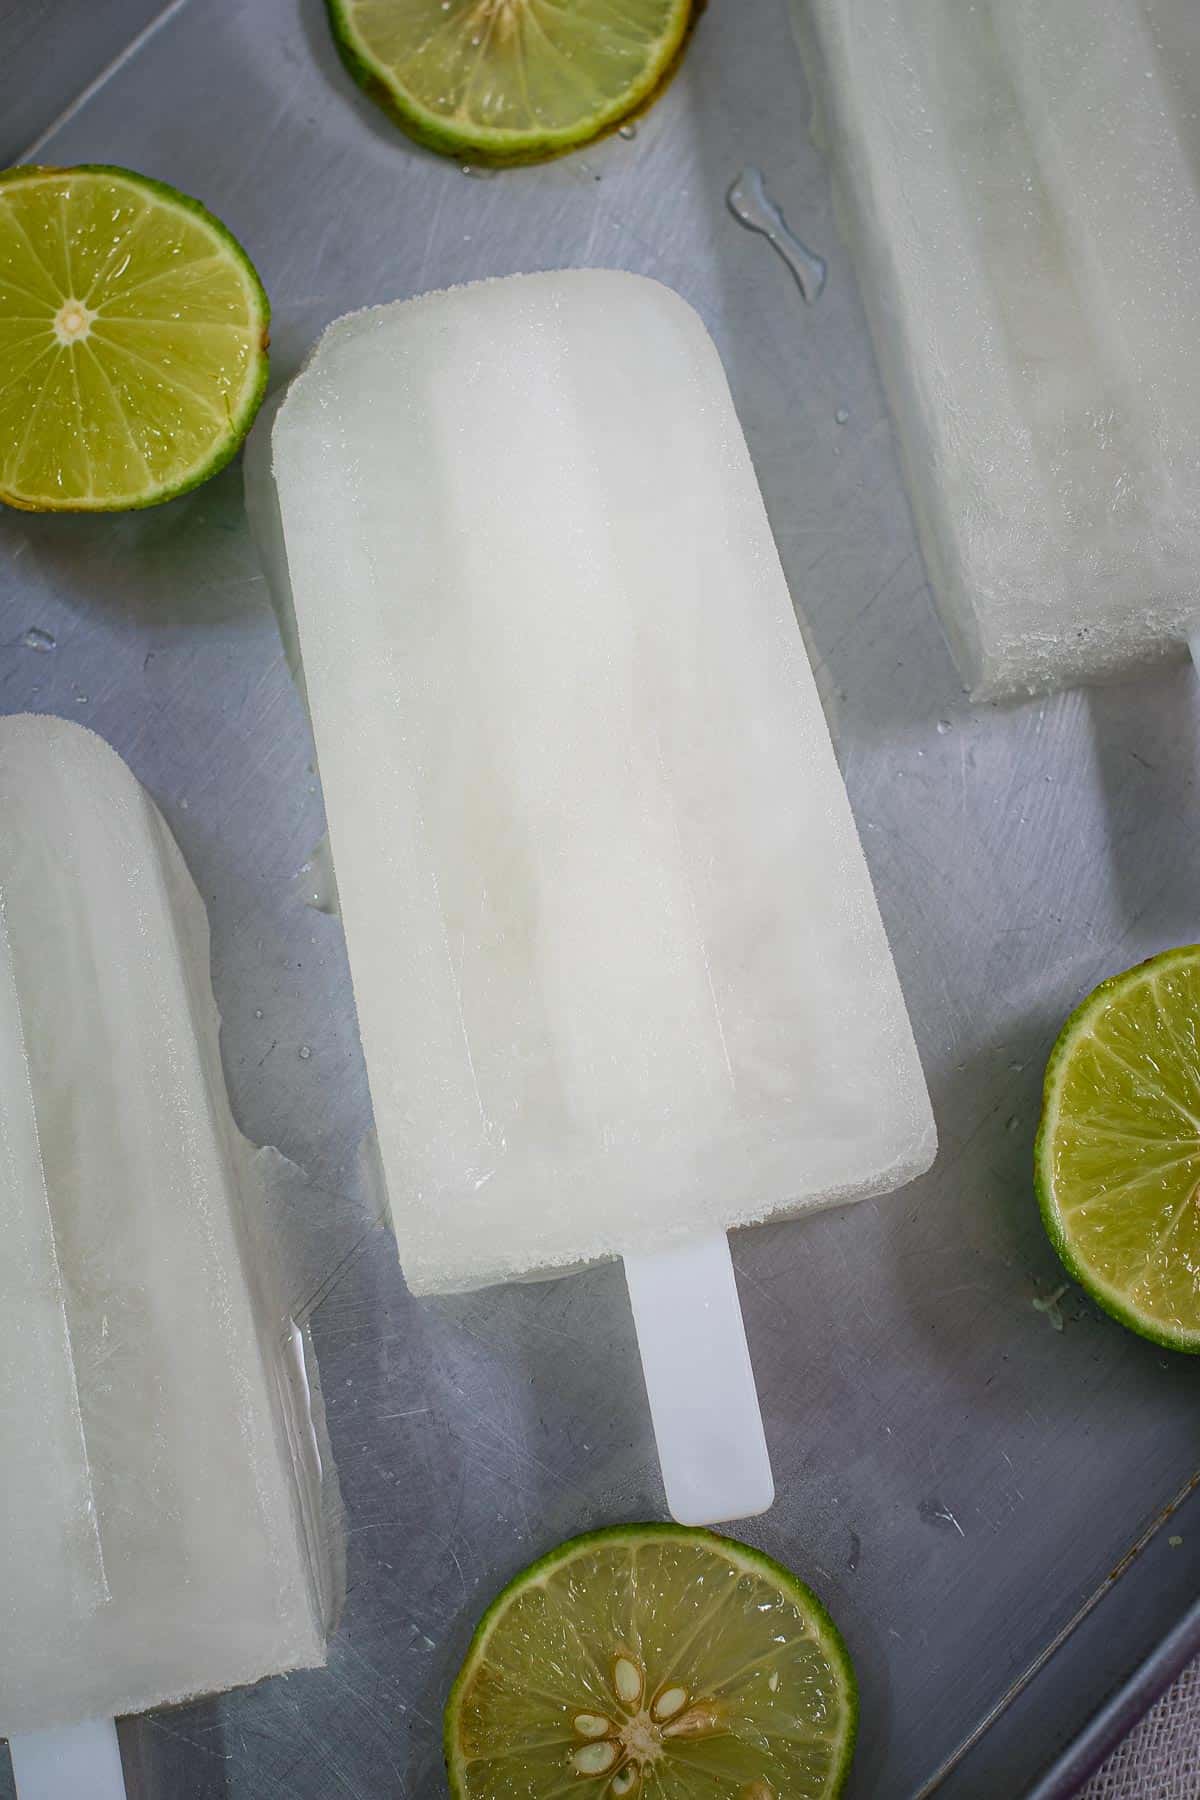 Close up of a white popsicle with lemon slices on the side